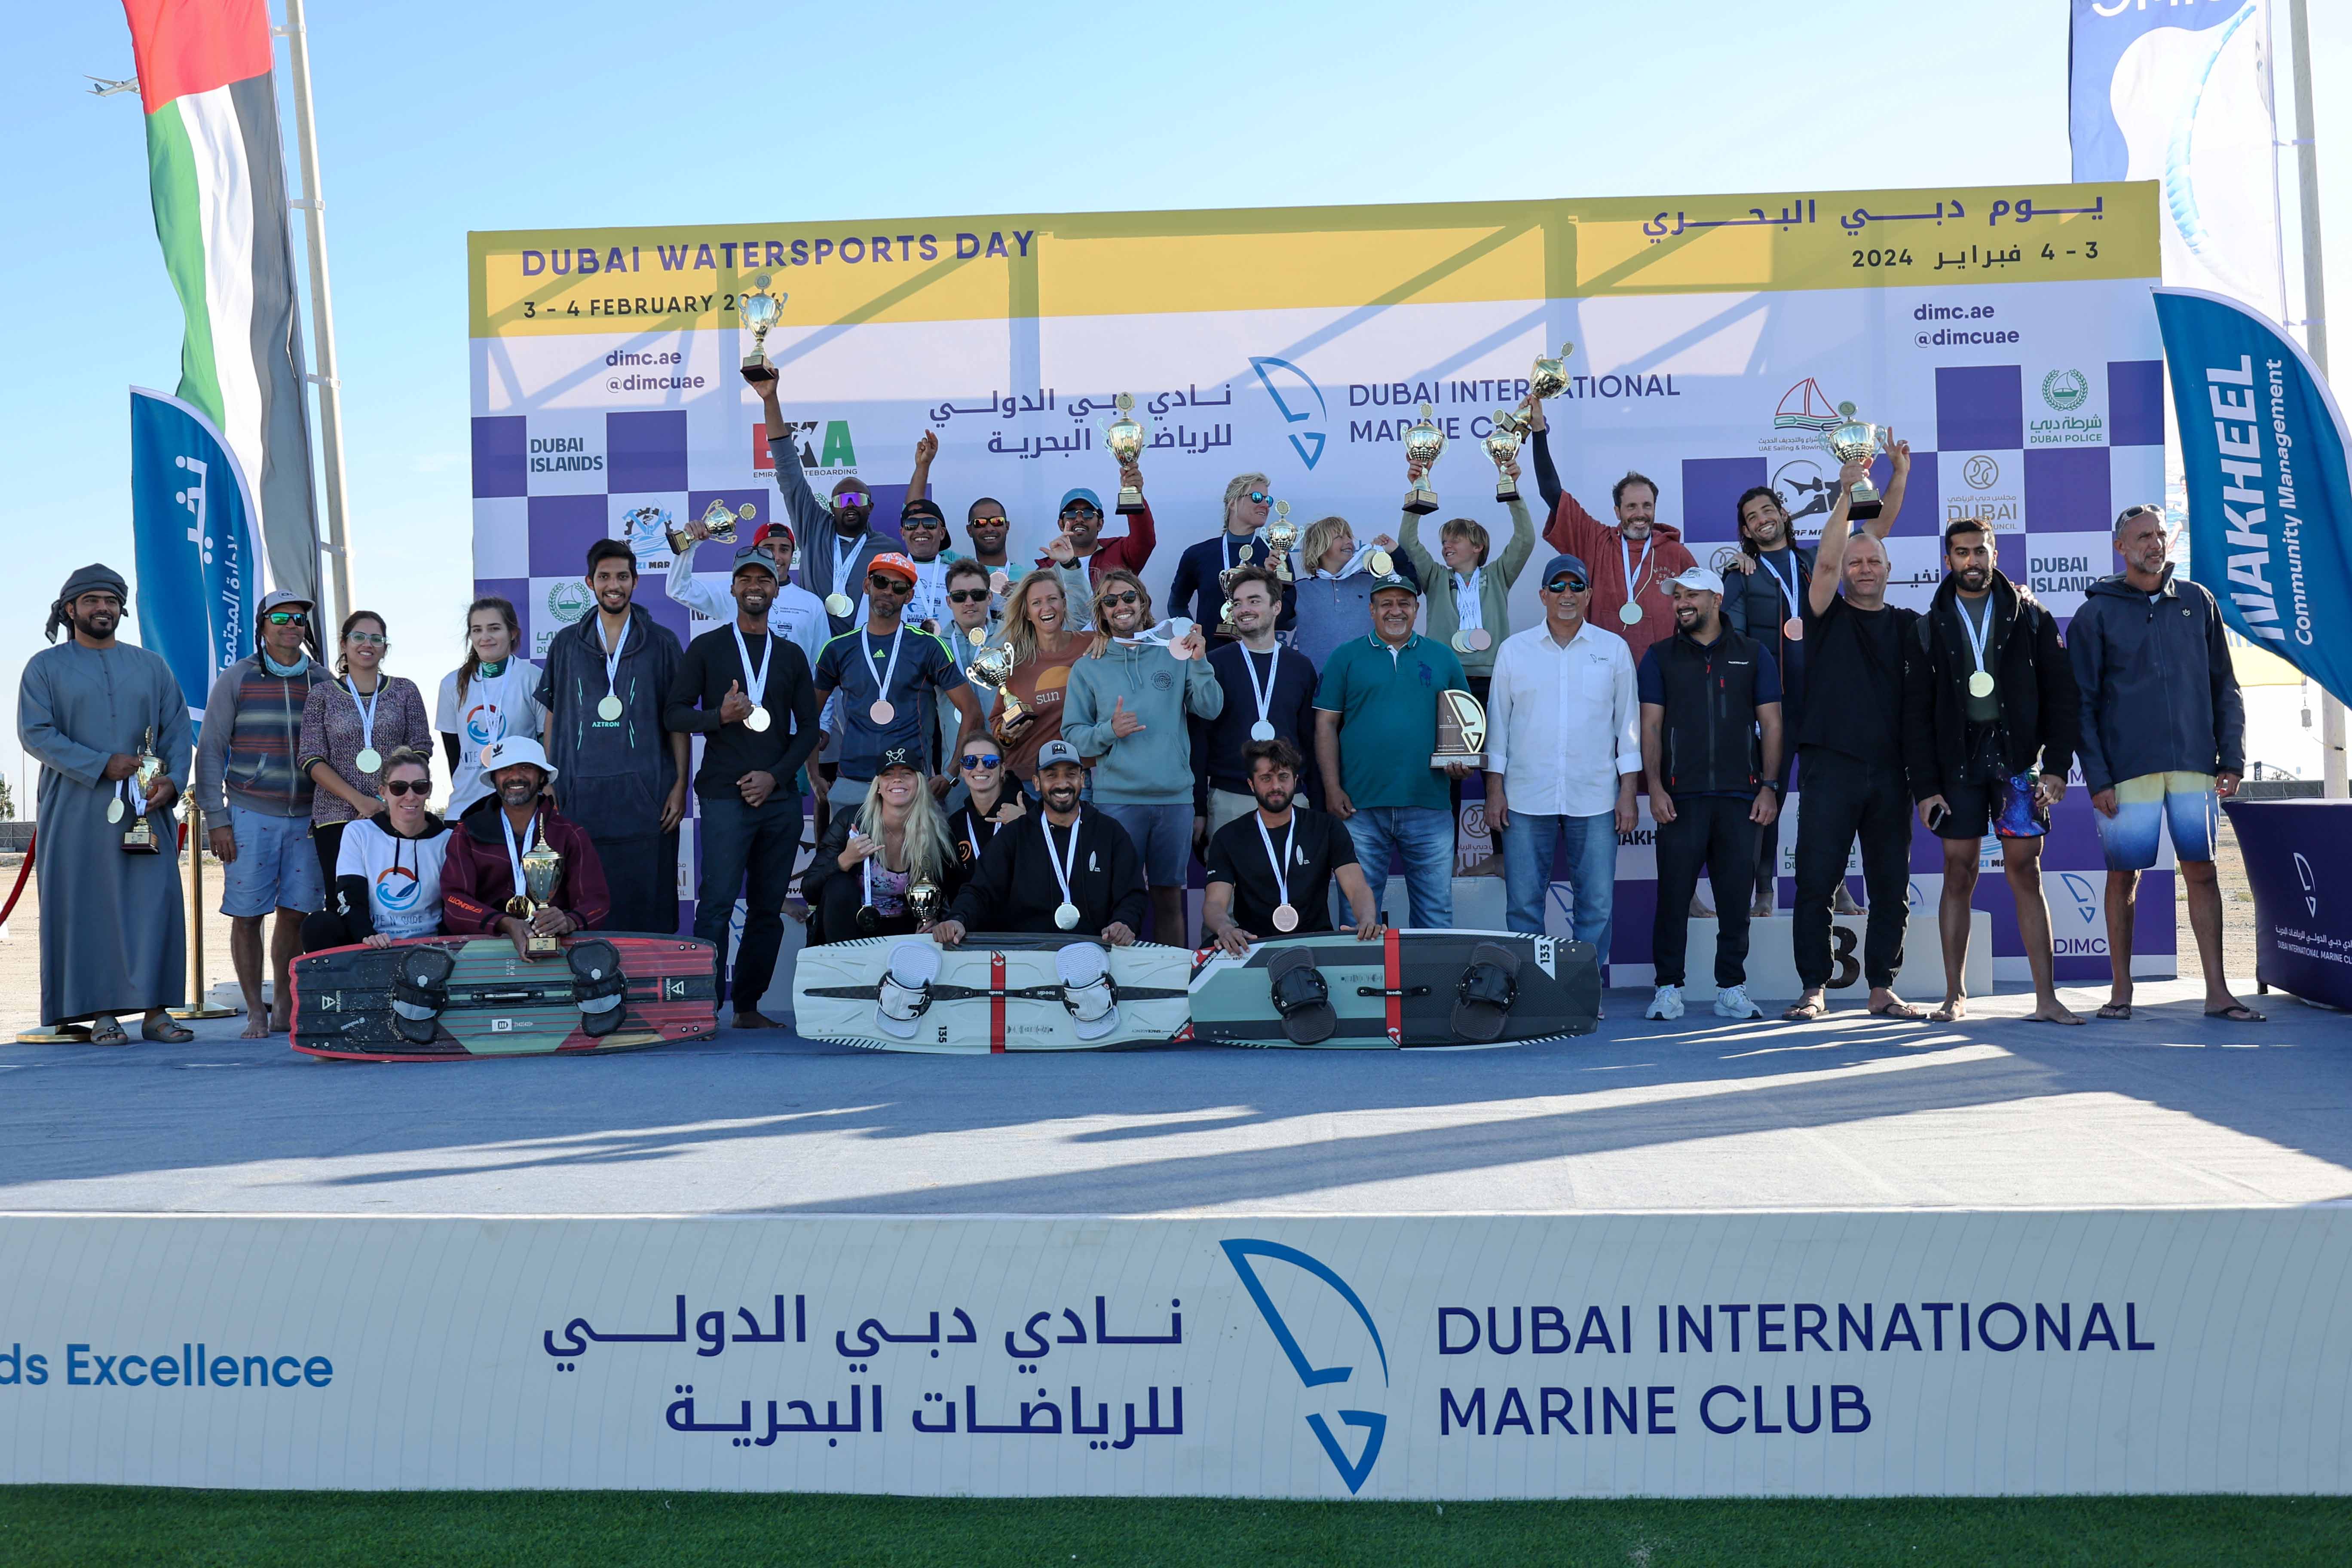 Our Champions Topped the Dubai Kitesurf Competition